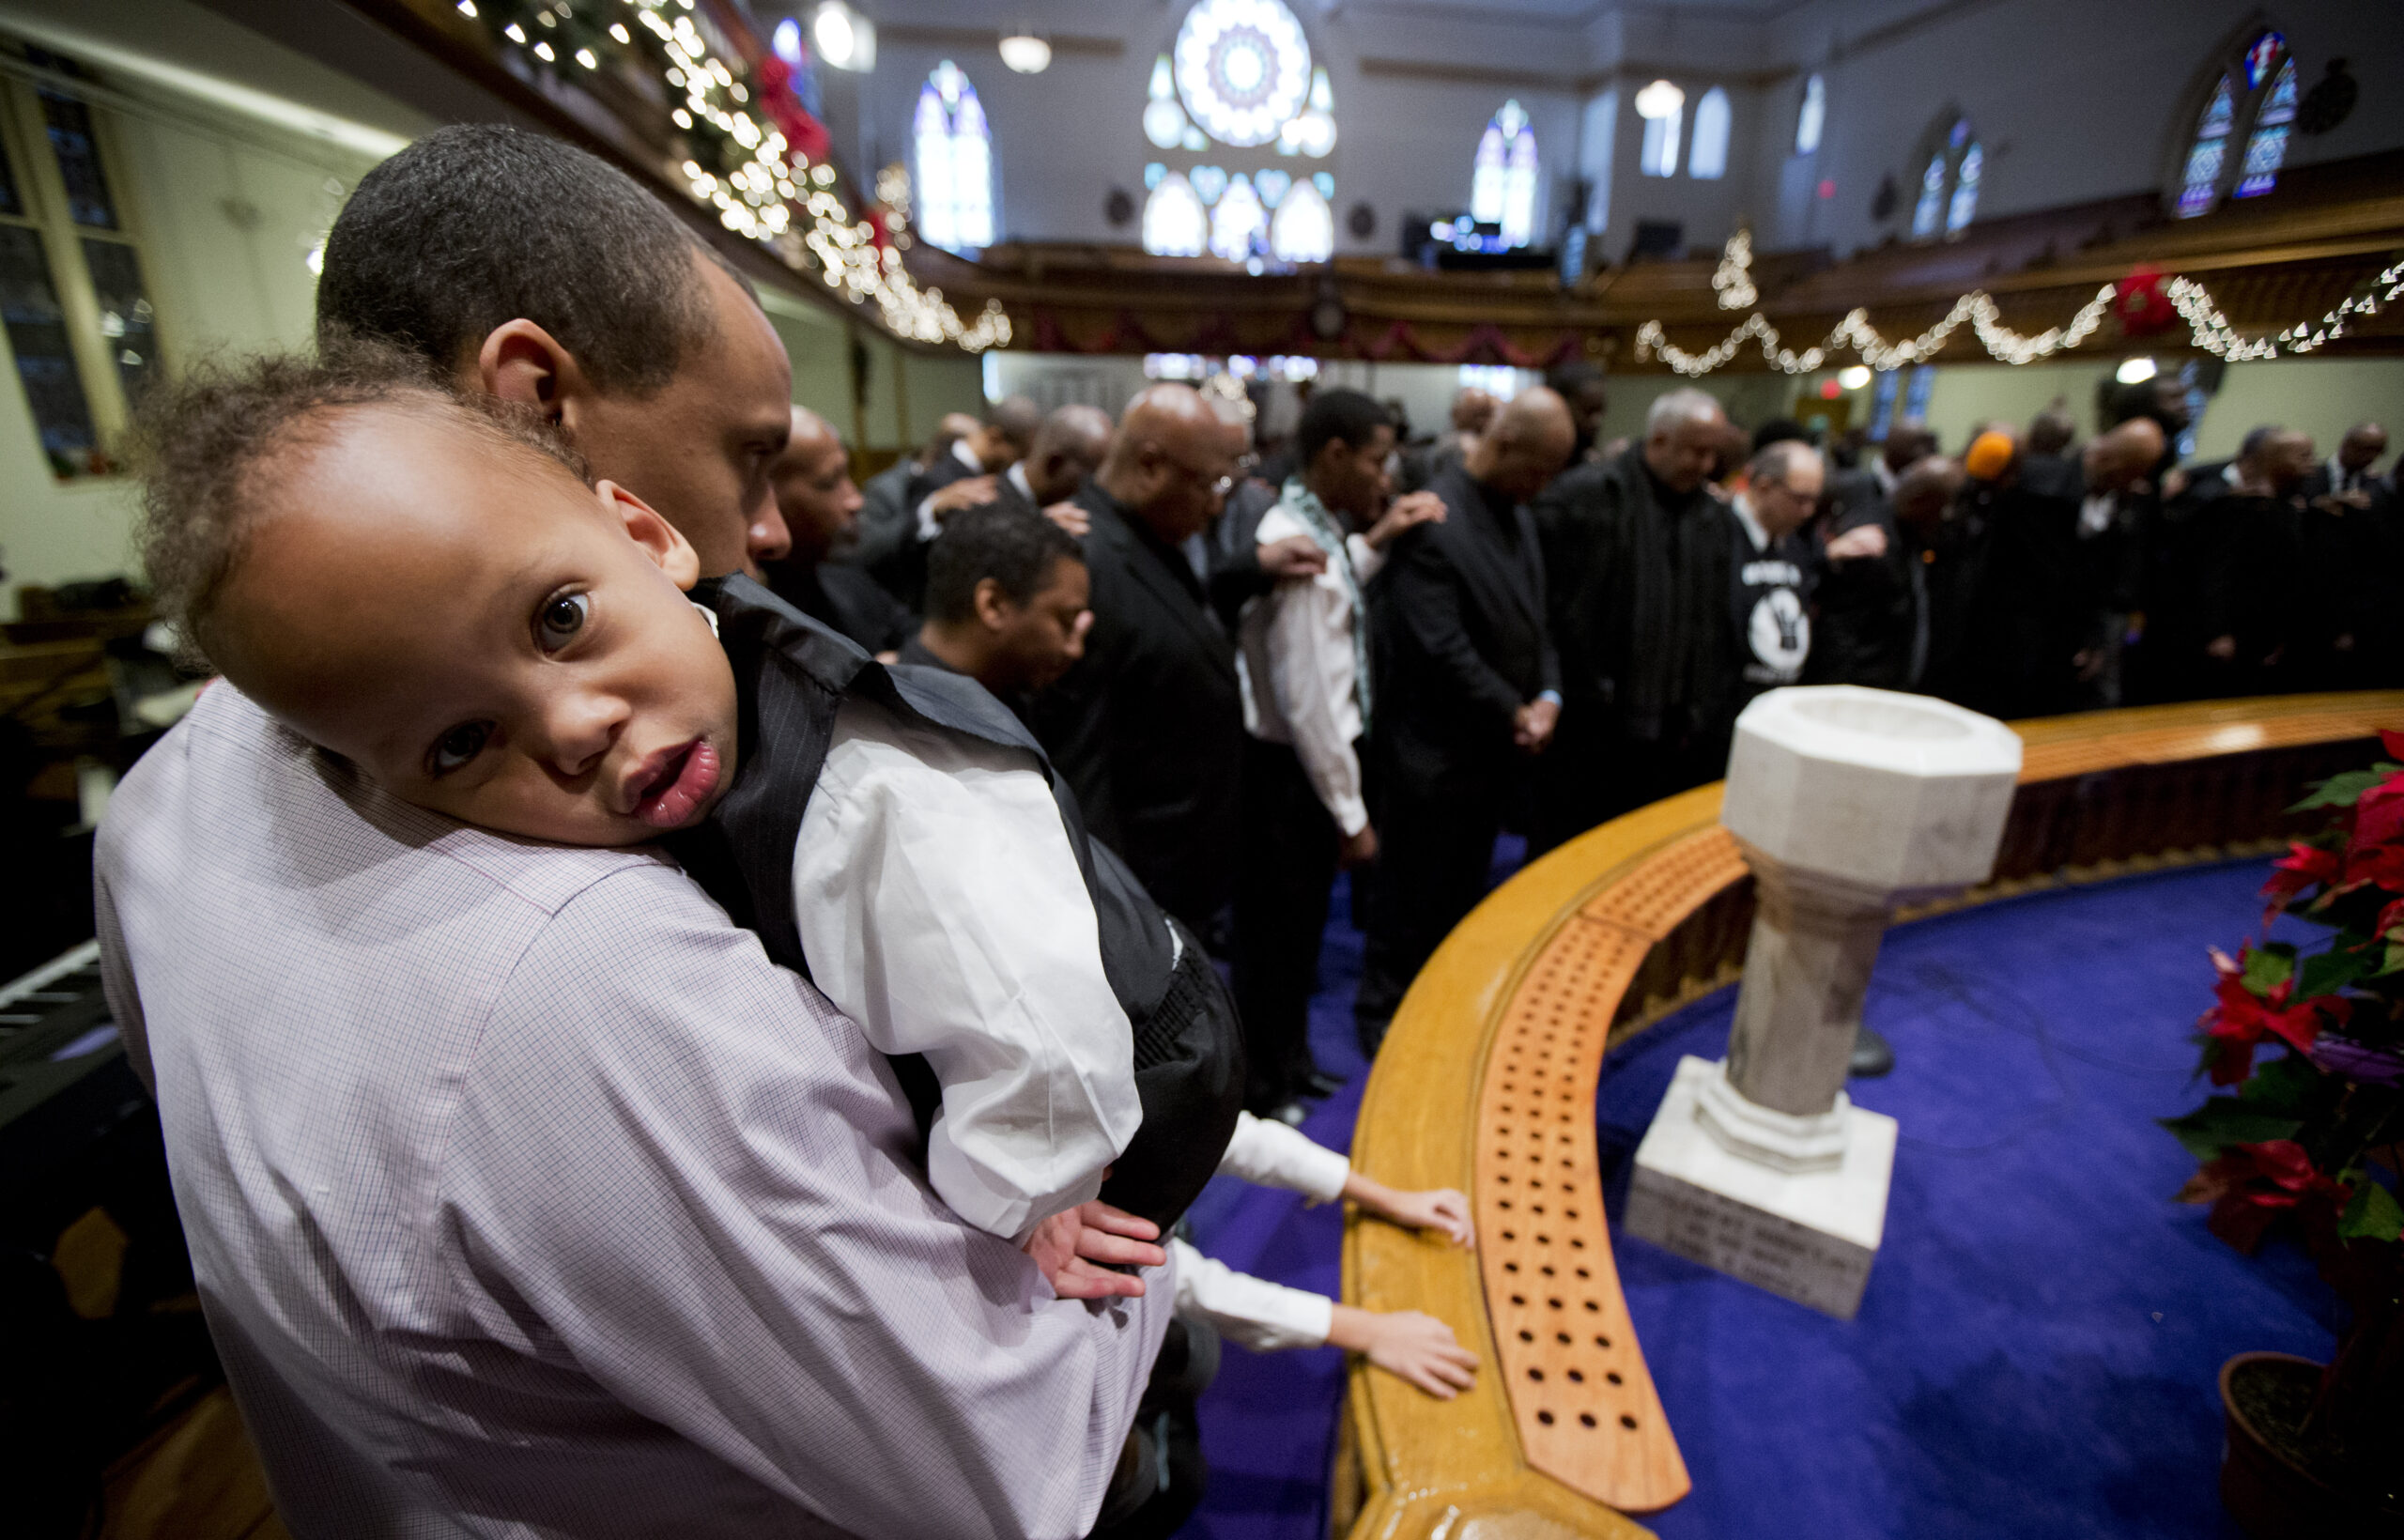 Antonio Harrison III, 2, rests in the arms of his father, Antonio Harrison Jr., as male churchgoers gather in front of the altar during service at the African Methodist Episcopal Church in Washington, D.C., Sunday, Dec. 14, 2014. Photo credit: Manuel Balce Ceneta, The Associated Press